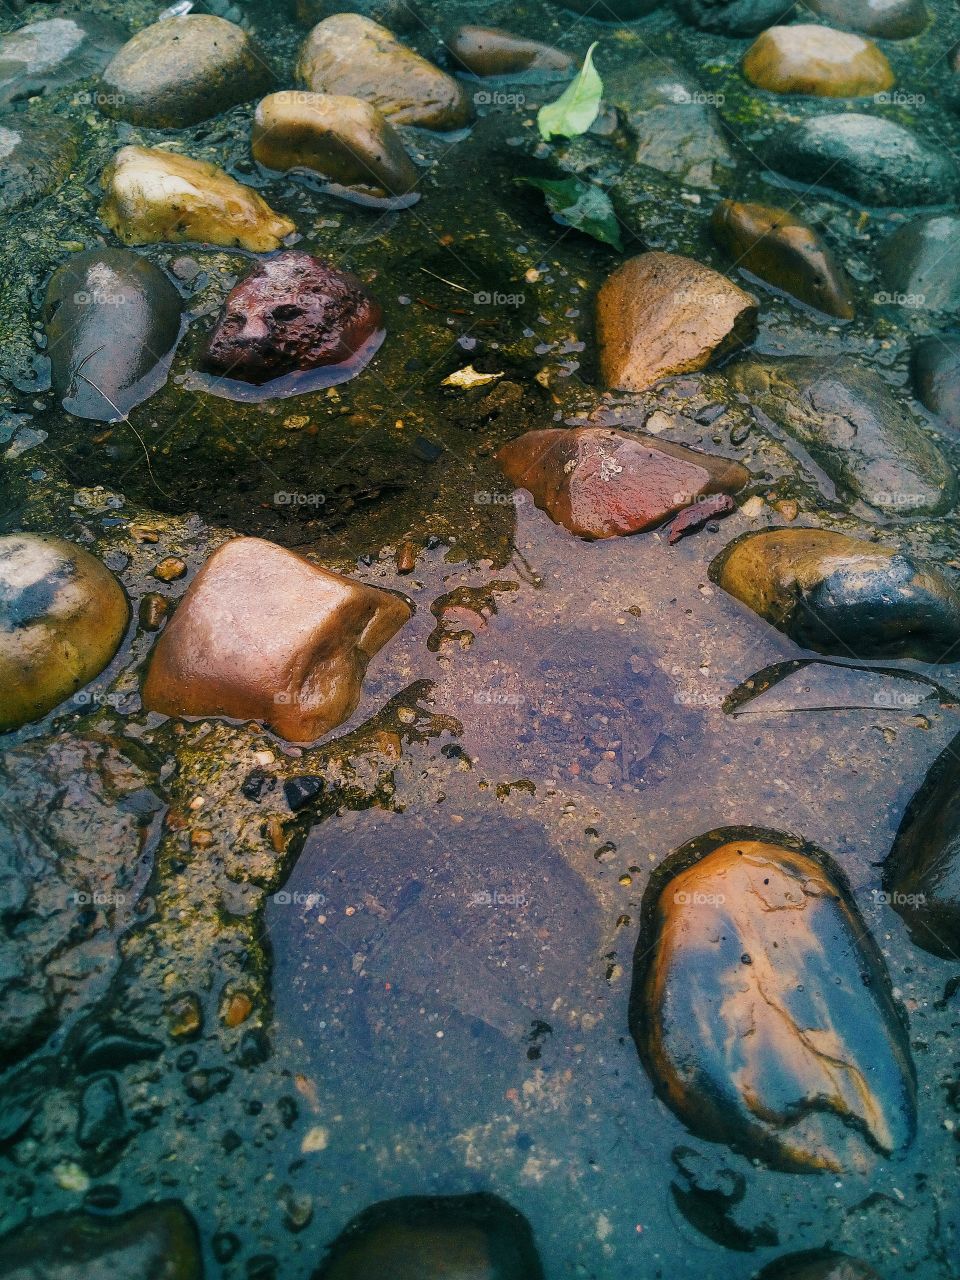 Rocks and stones covered in the clear water from the rain.